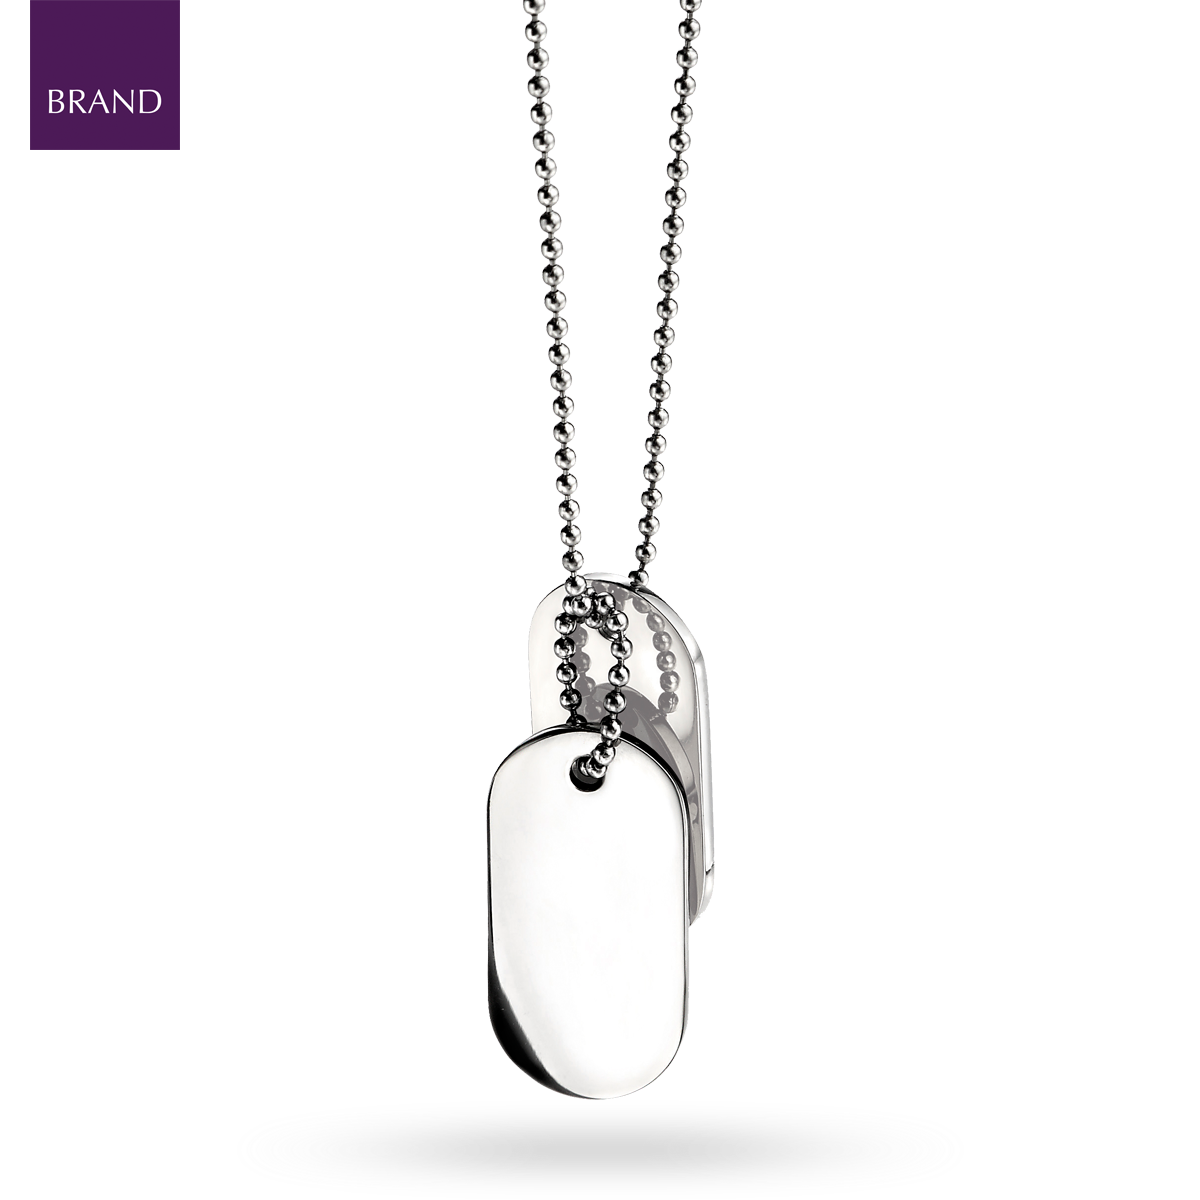 Stainless Steel Oval Dog Tag Necklace